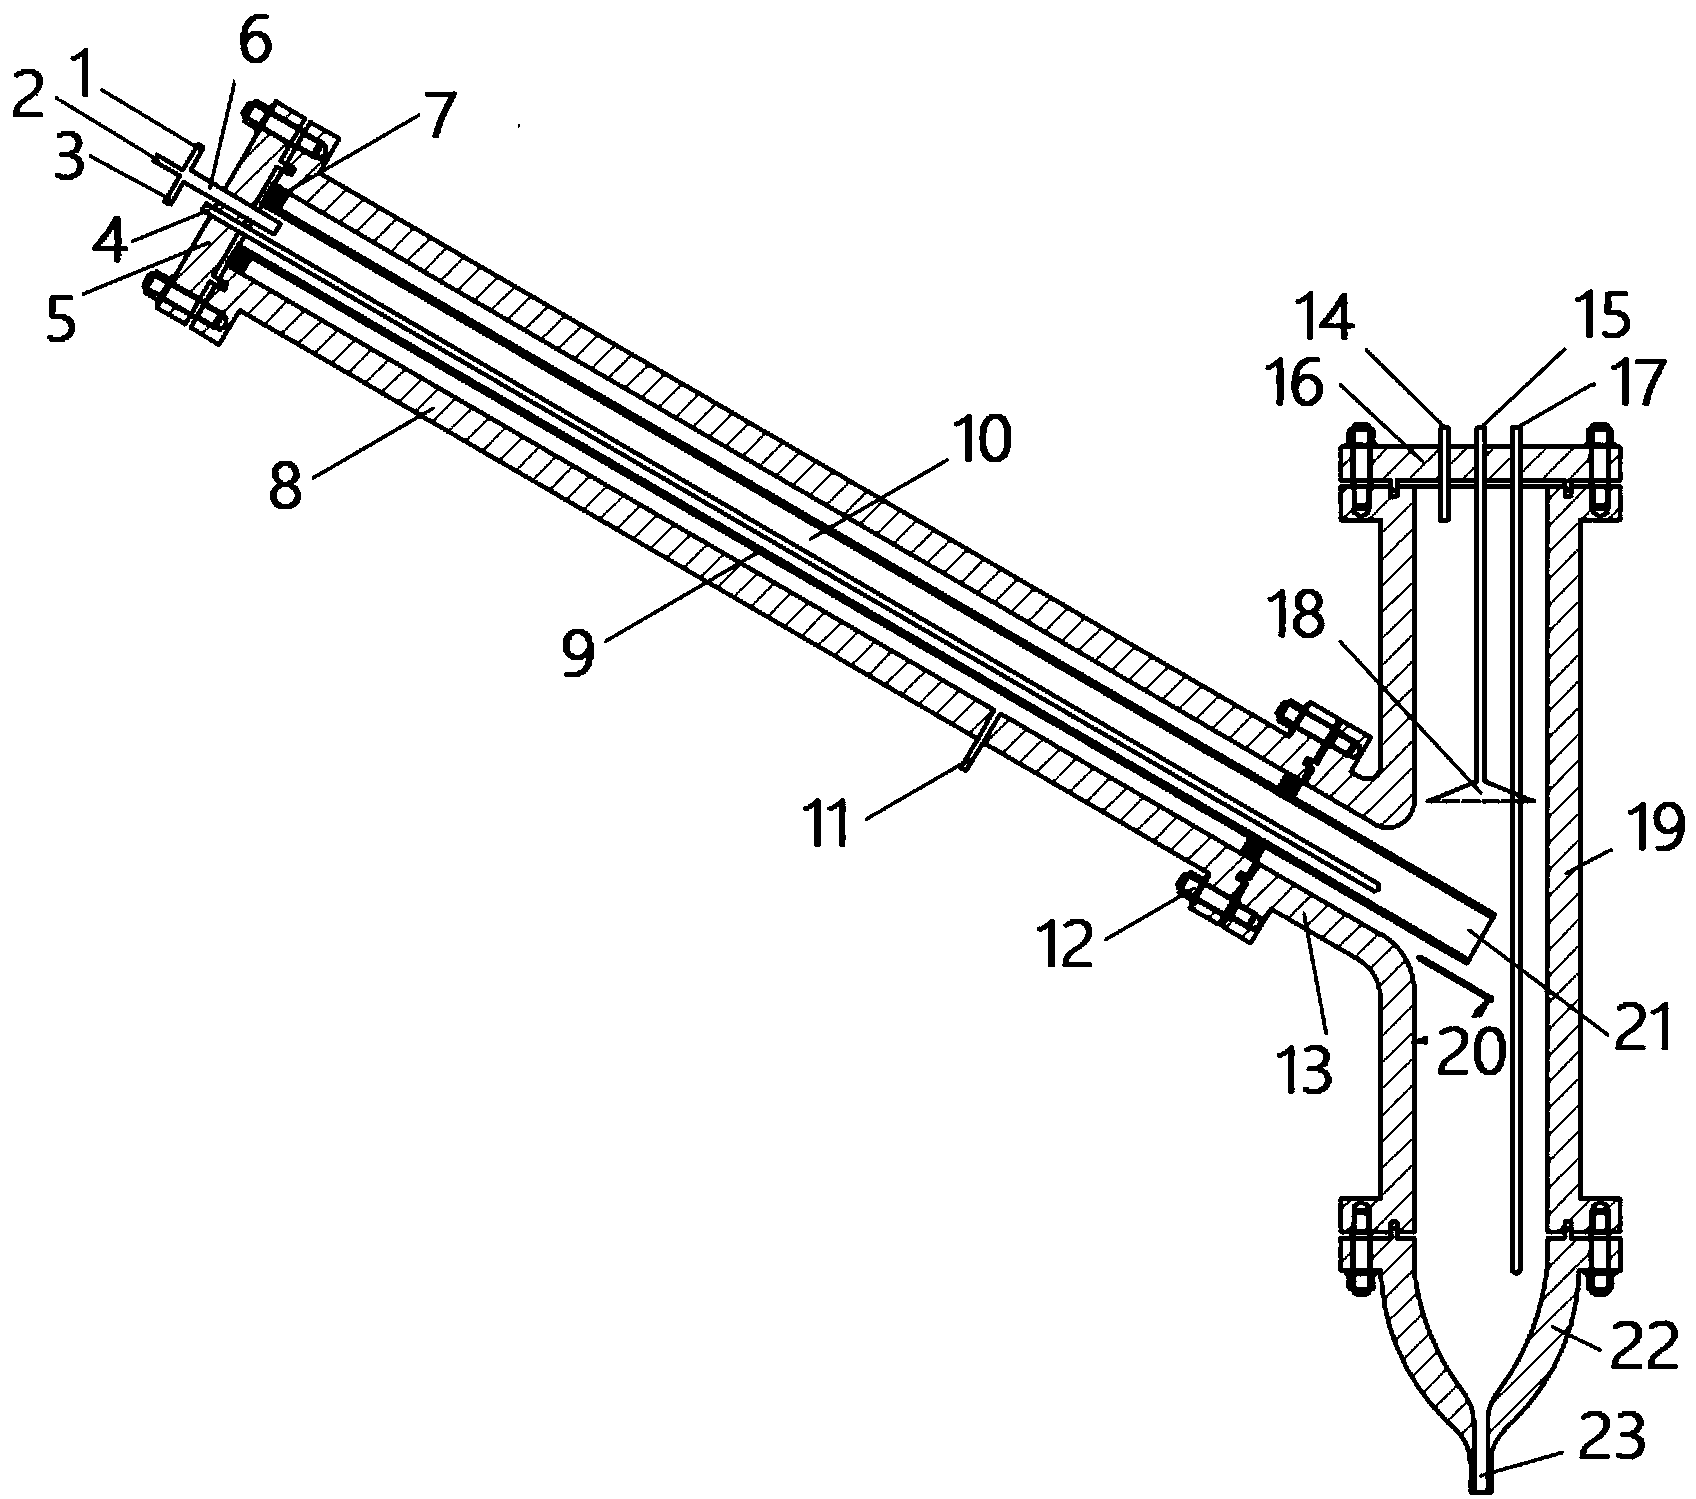 Supercritical water oxidizing device